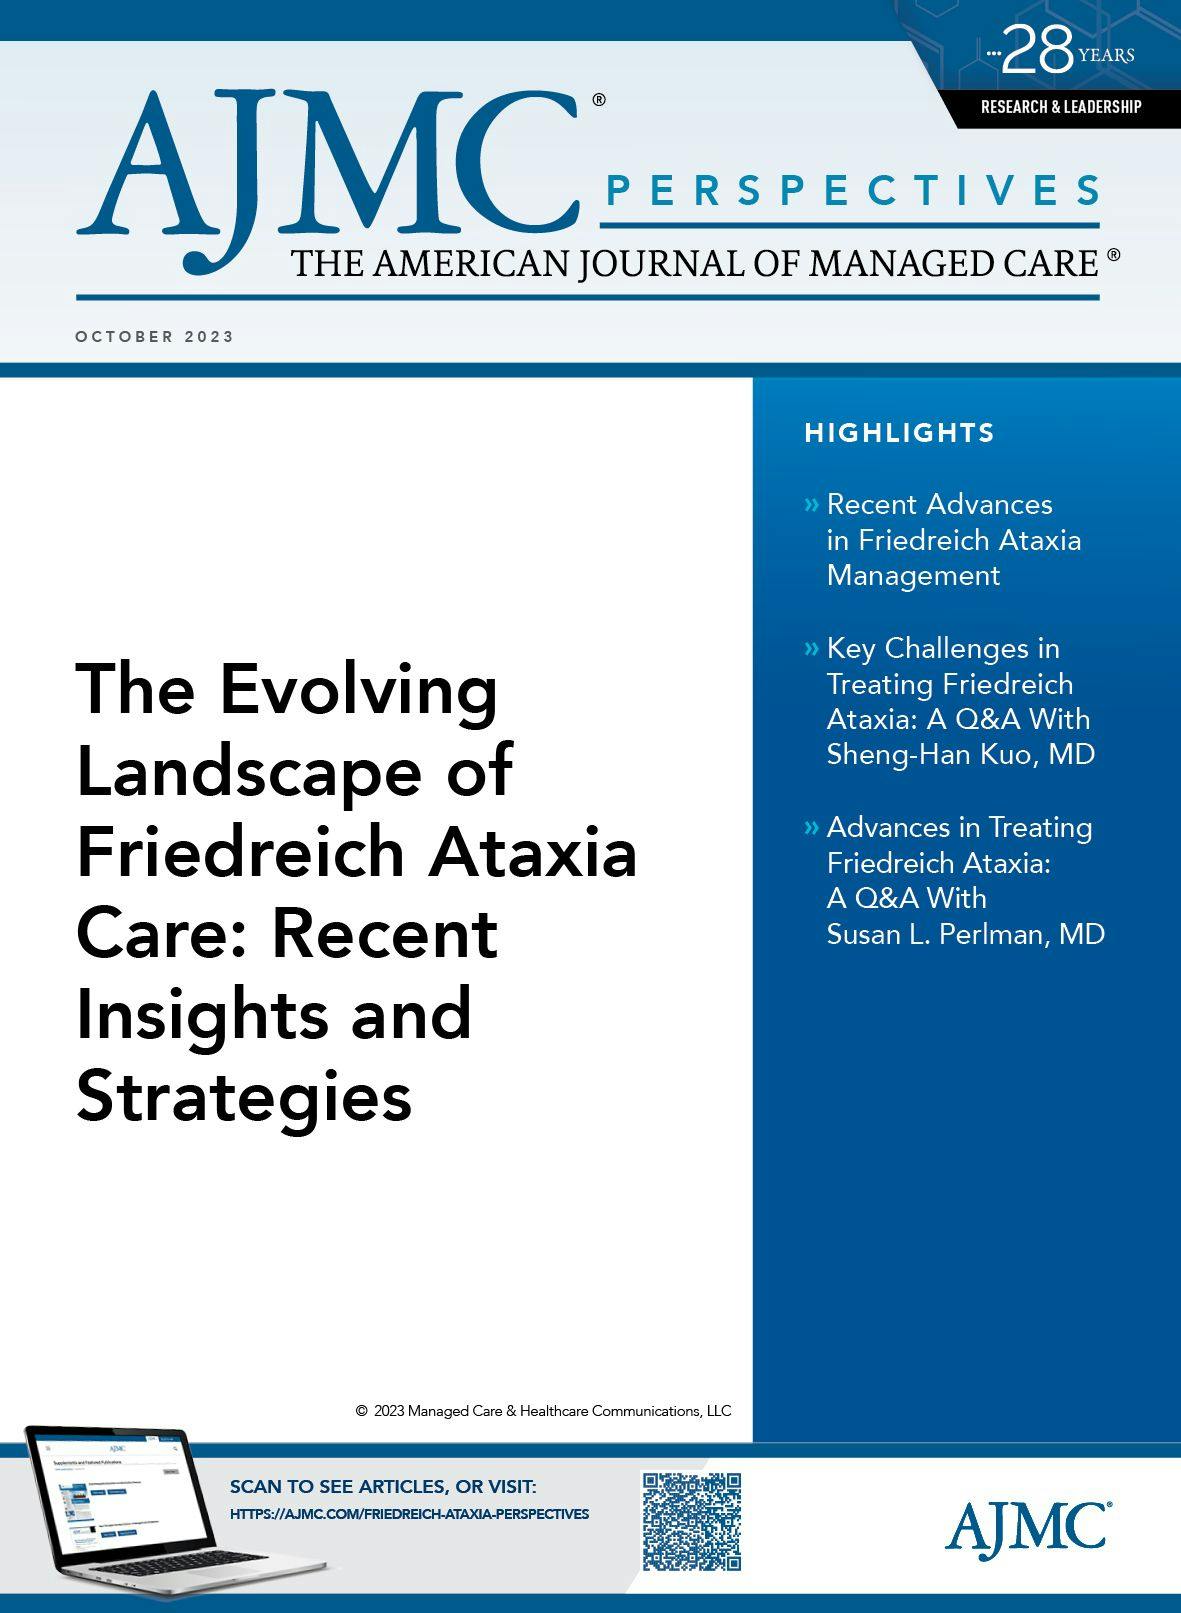 The Evolving Landscape of Friedreich Ataxia Care: Recent Insights and Strategies